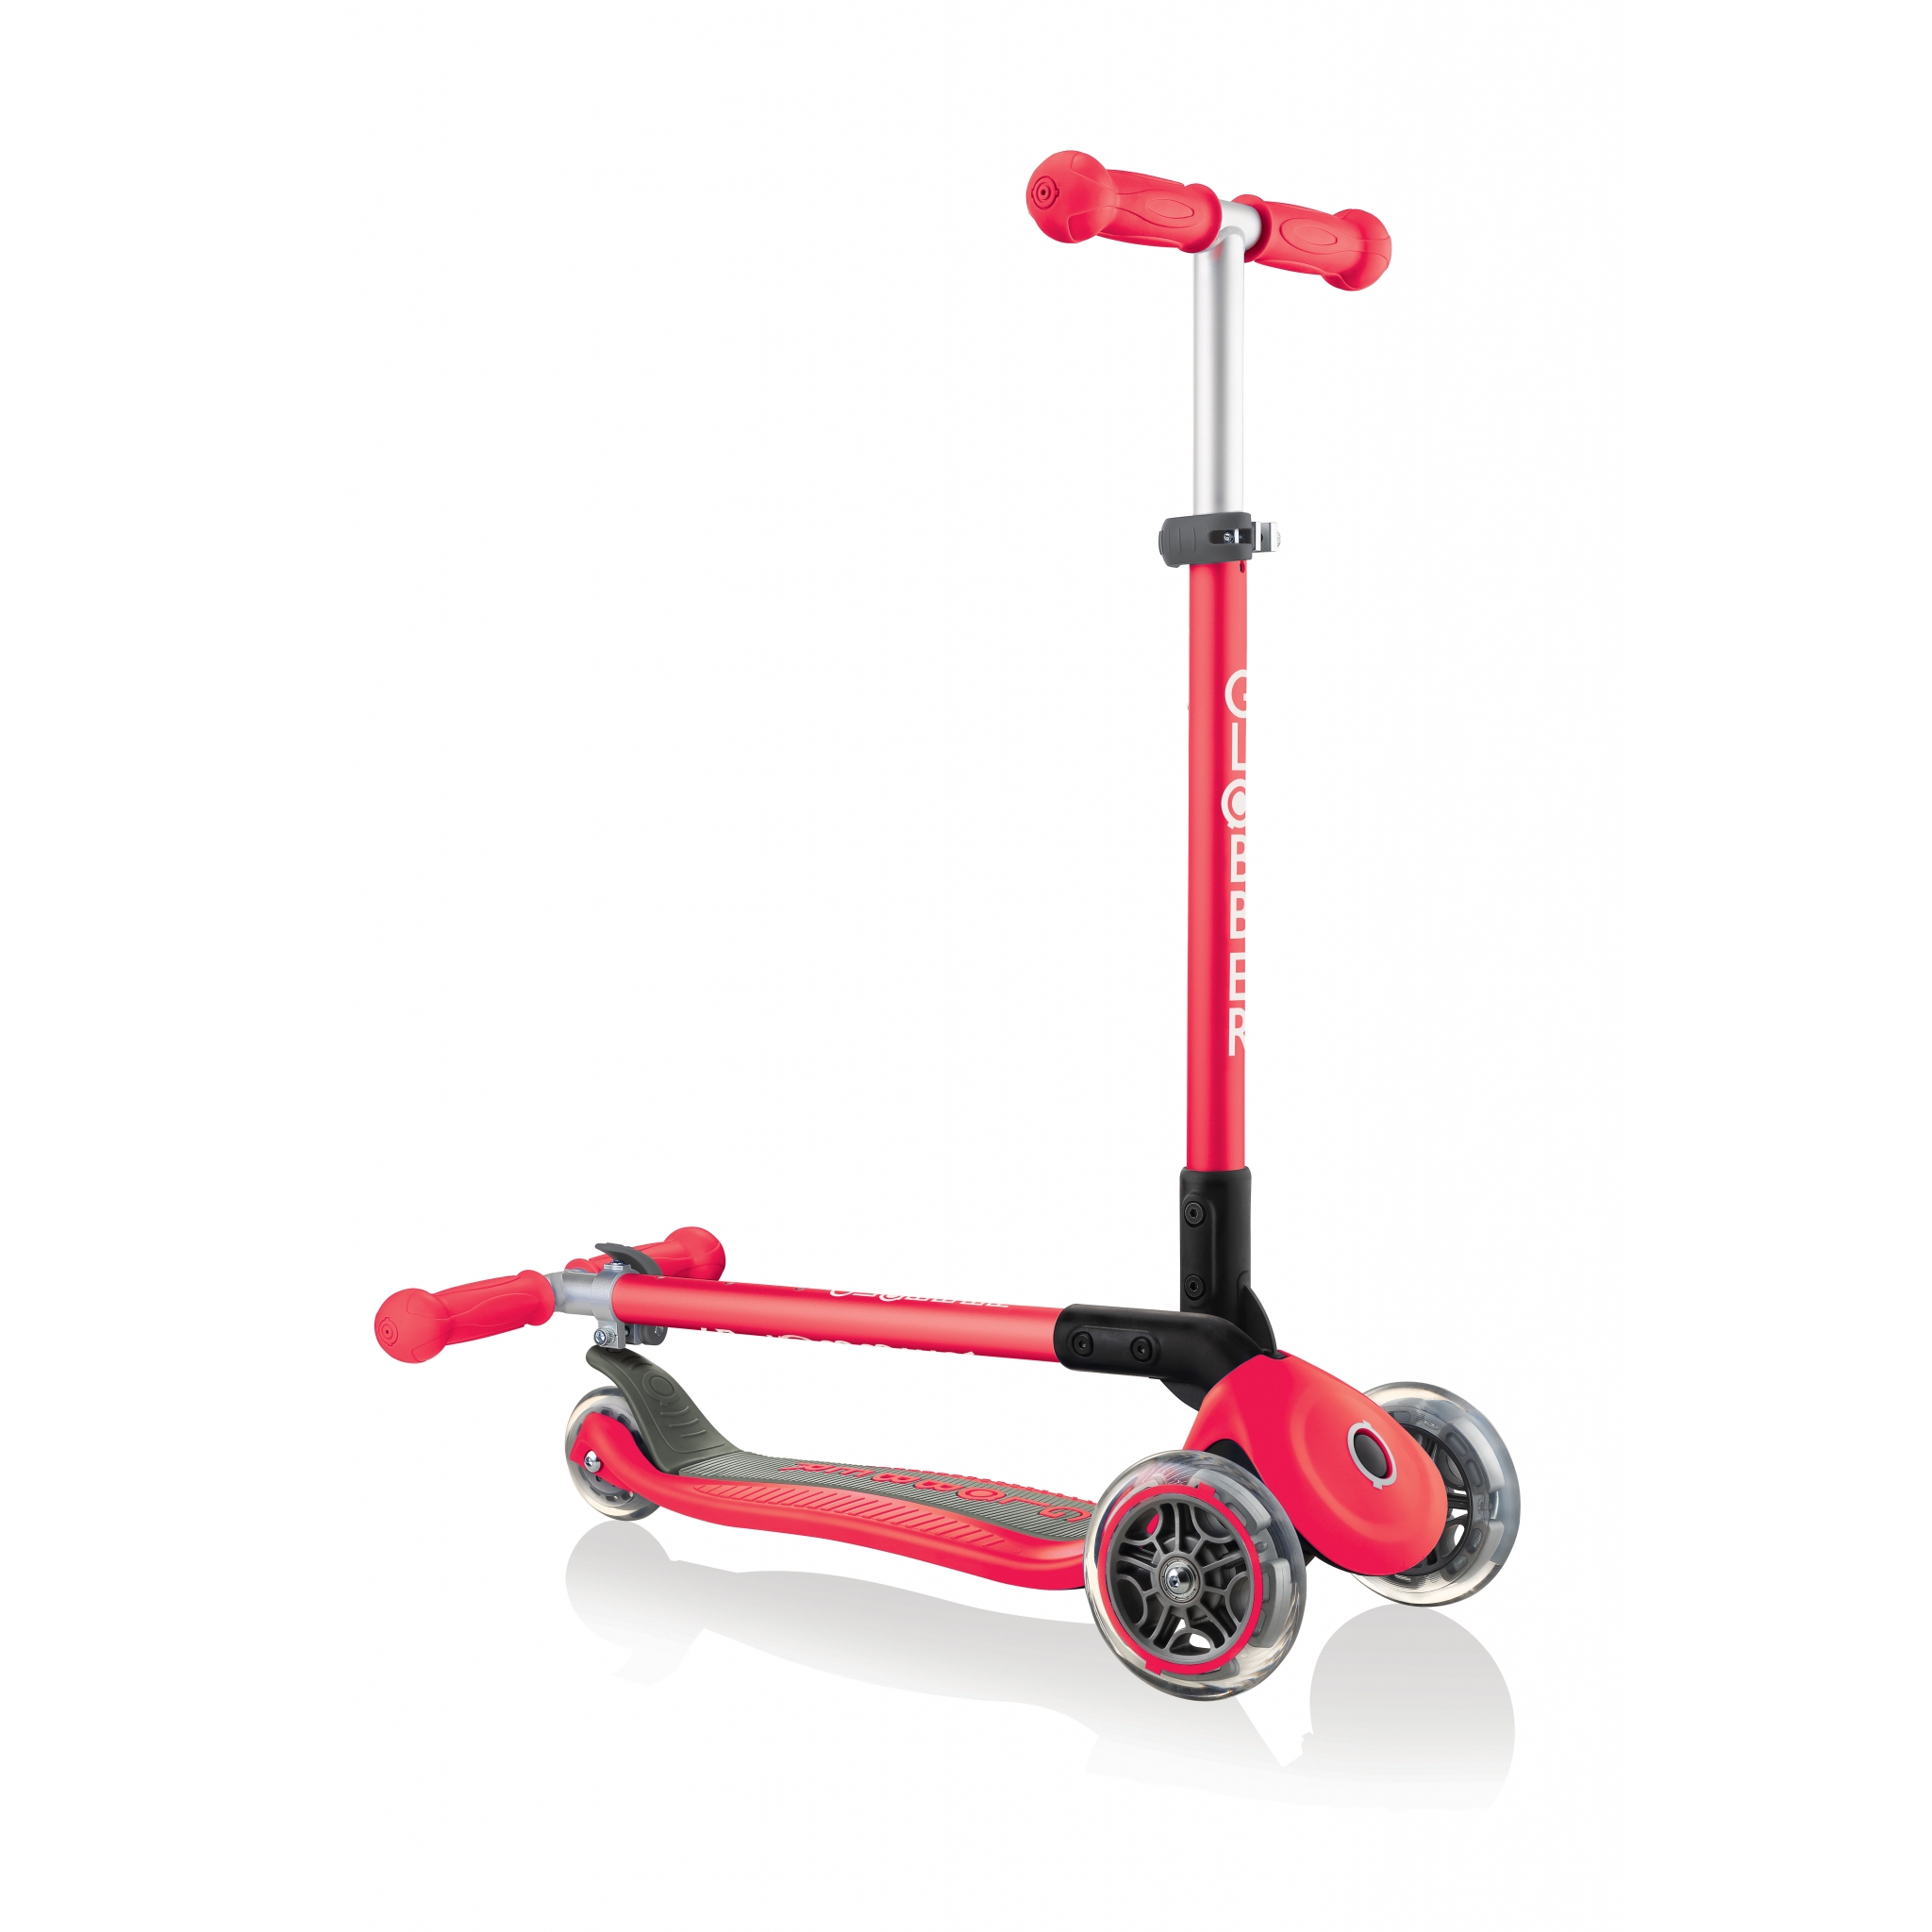 PRIMO-FOLDABLE-3-wheel-fold-up-scooter-for-kids-new-red 0